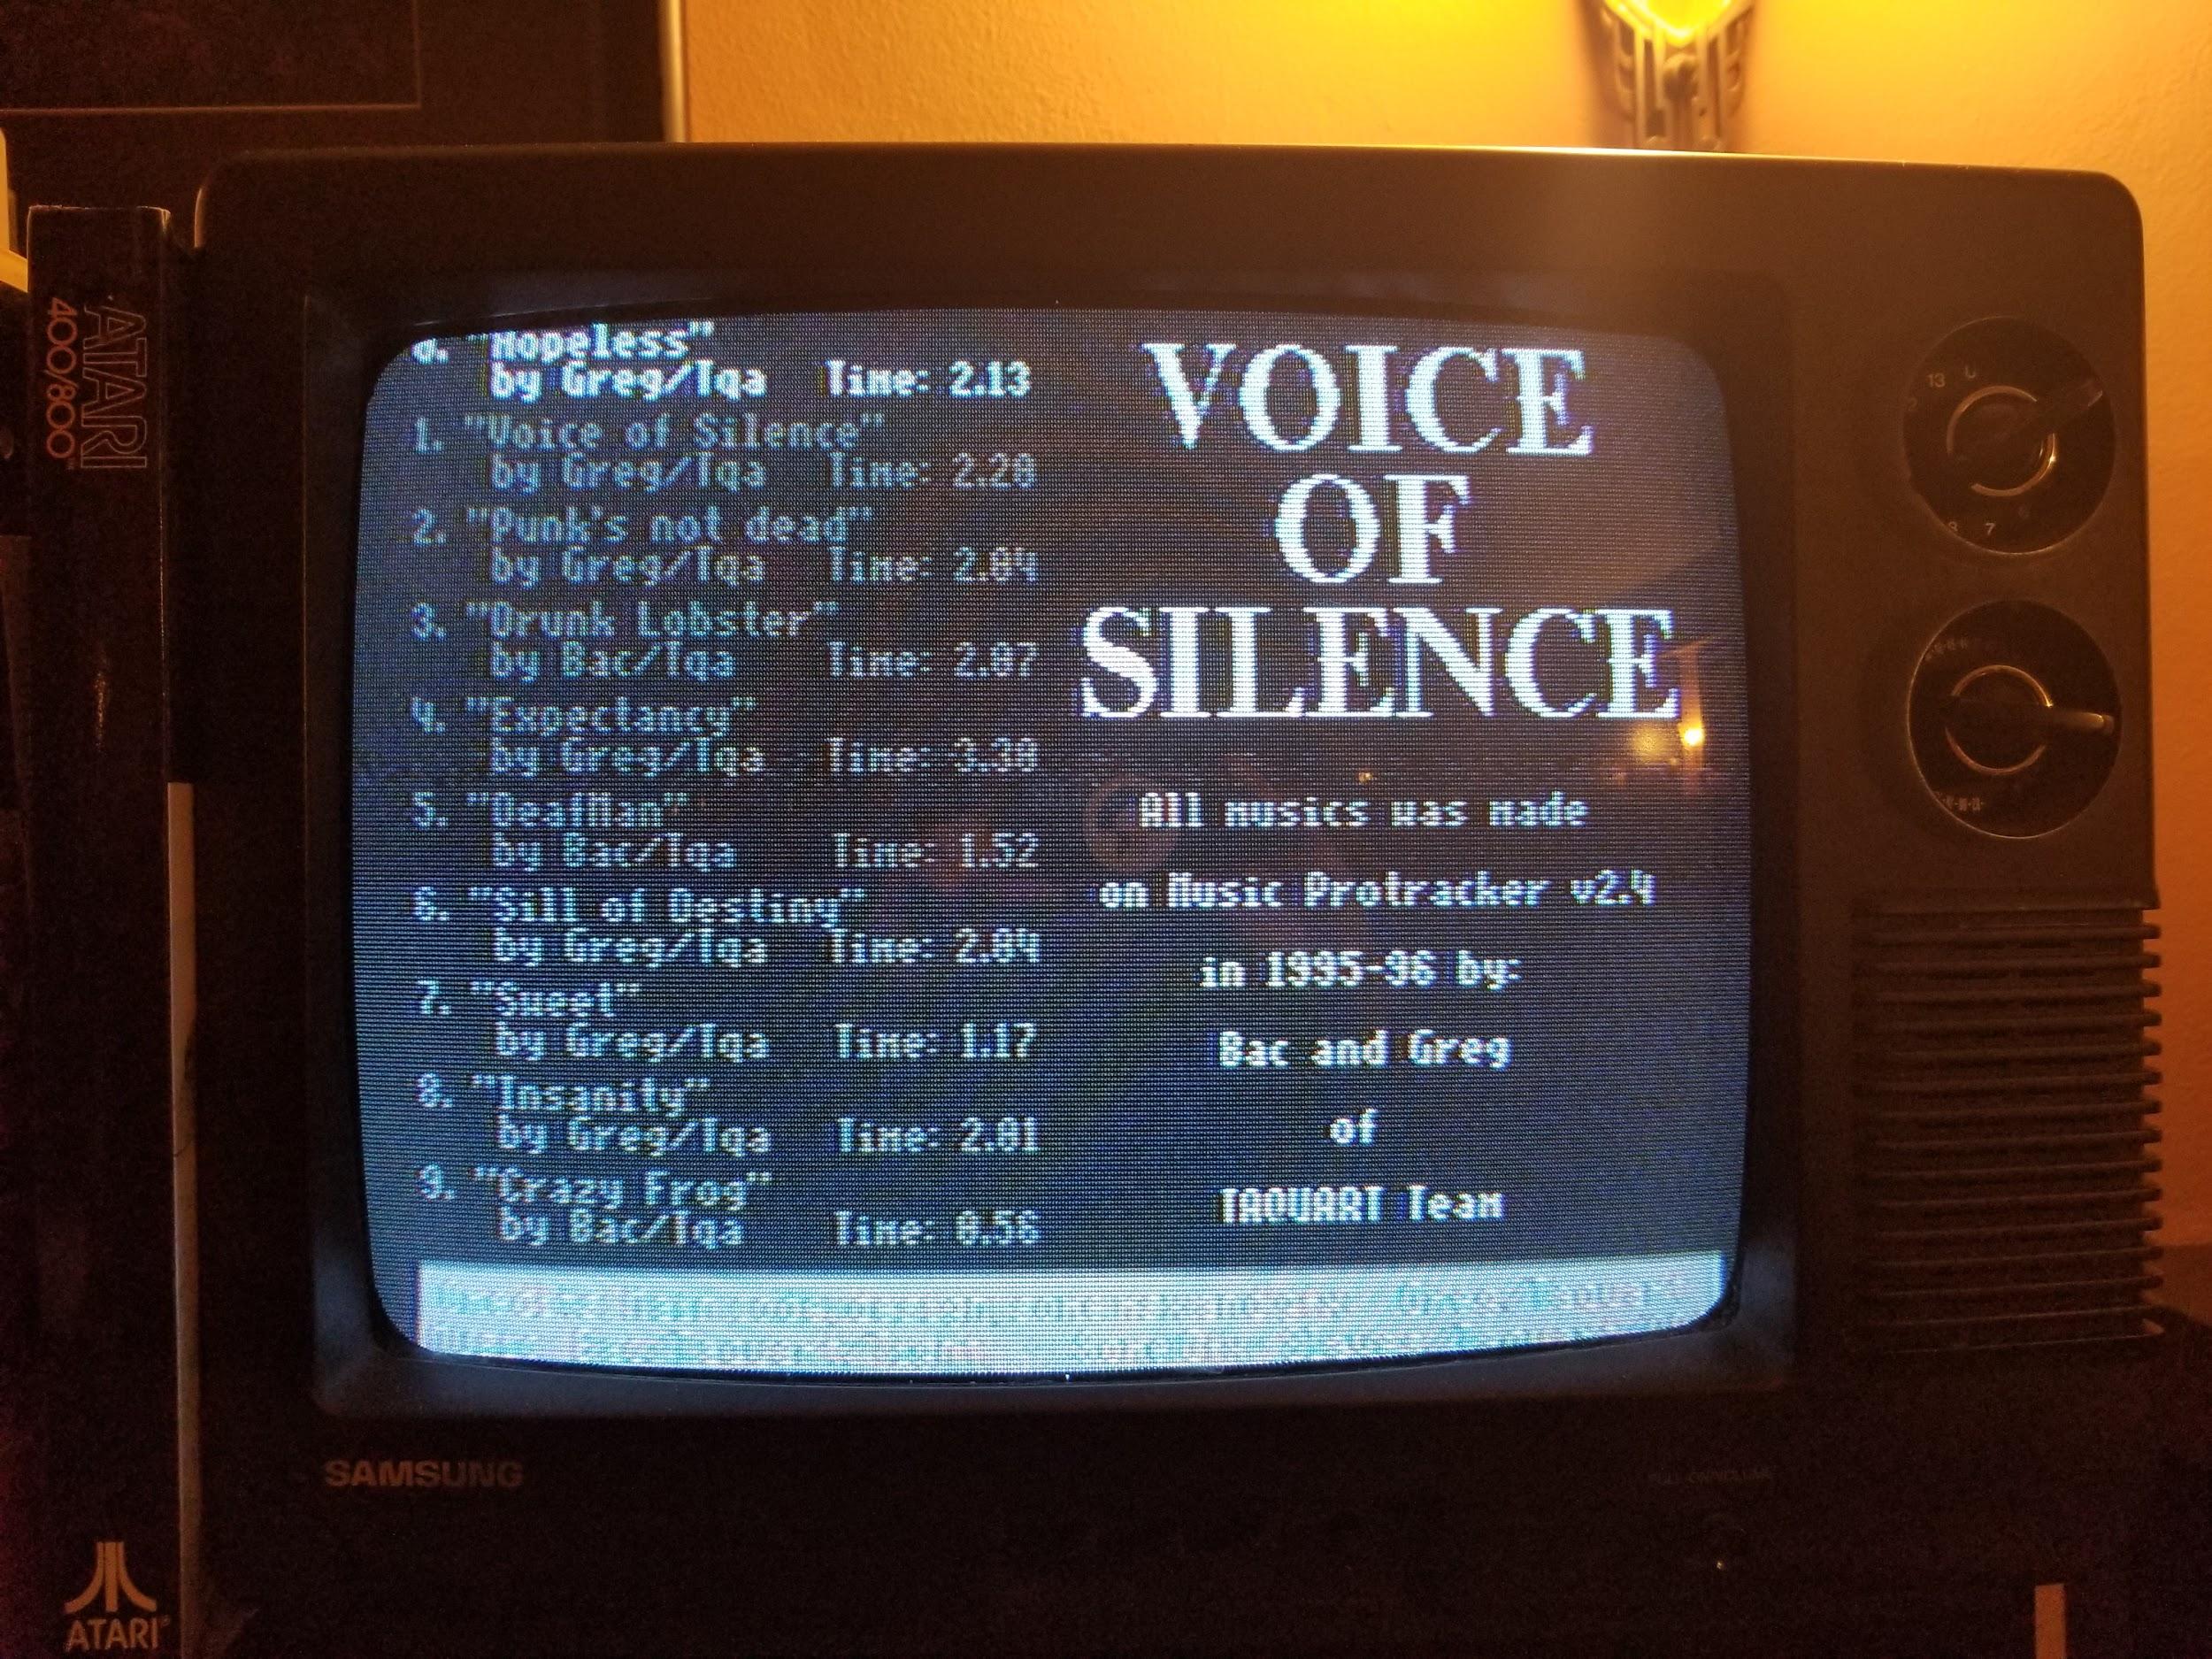 Voice of Silence music disk loaded up